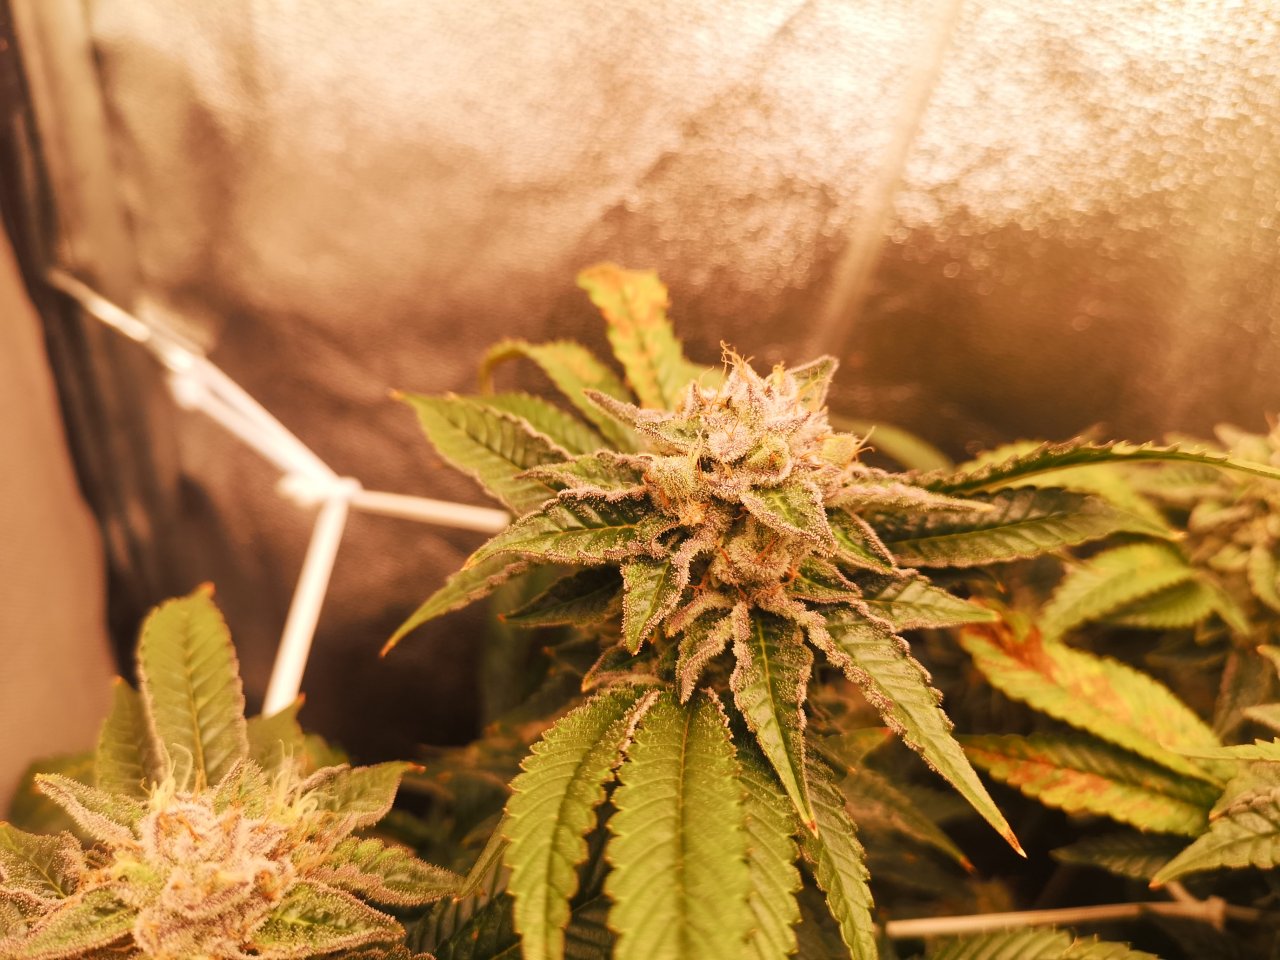 Blue Cheese - w8d1 - 9/10 ripening - 2